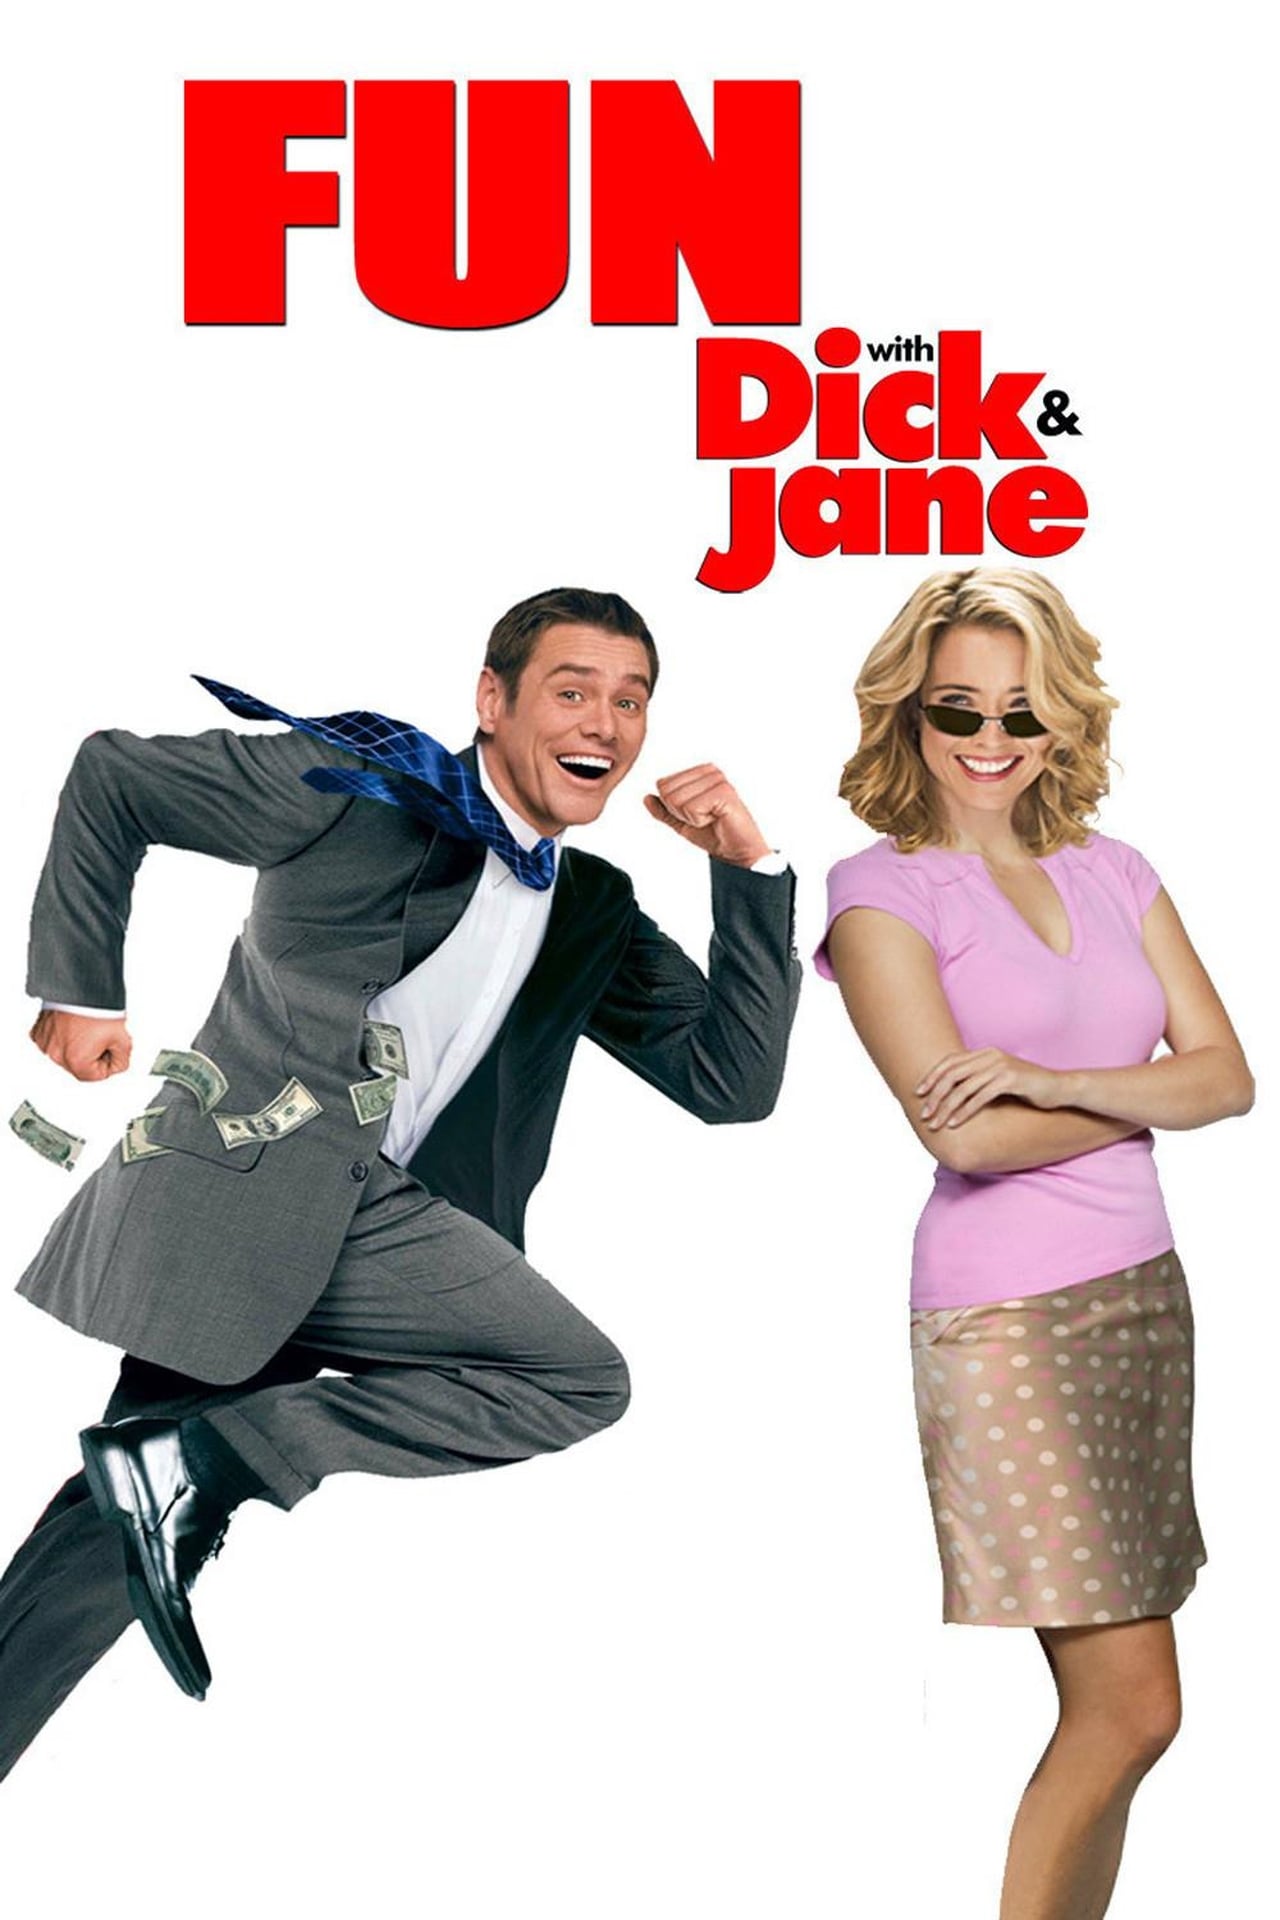 netflix-fun-with-dick-and-jane-2005-128kbps-23-976fps-48khz-2-0ch